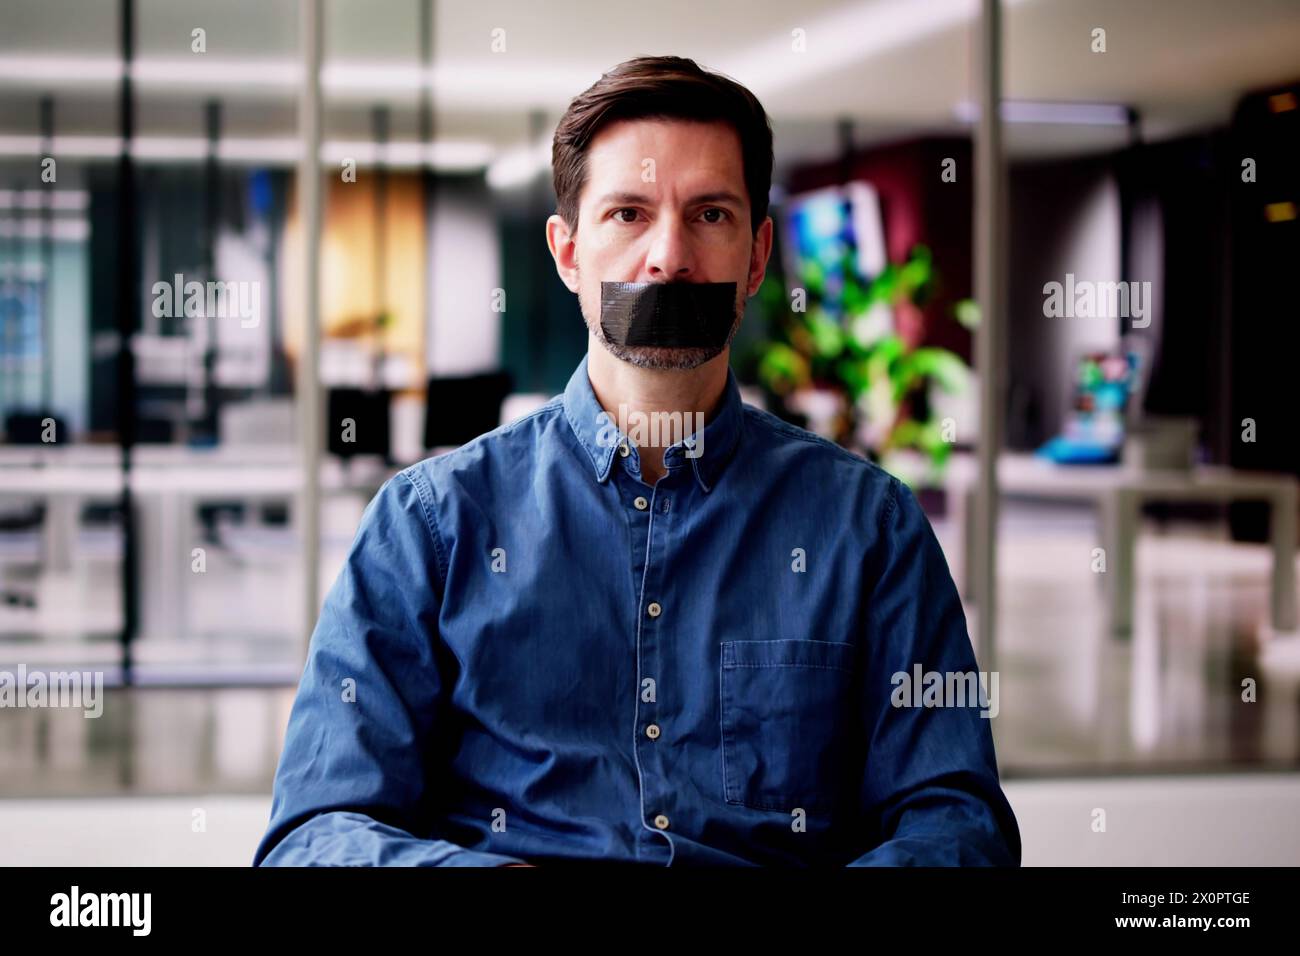 Young Man With Black Duct Tape Over His Mouth In Office Stock Photo